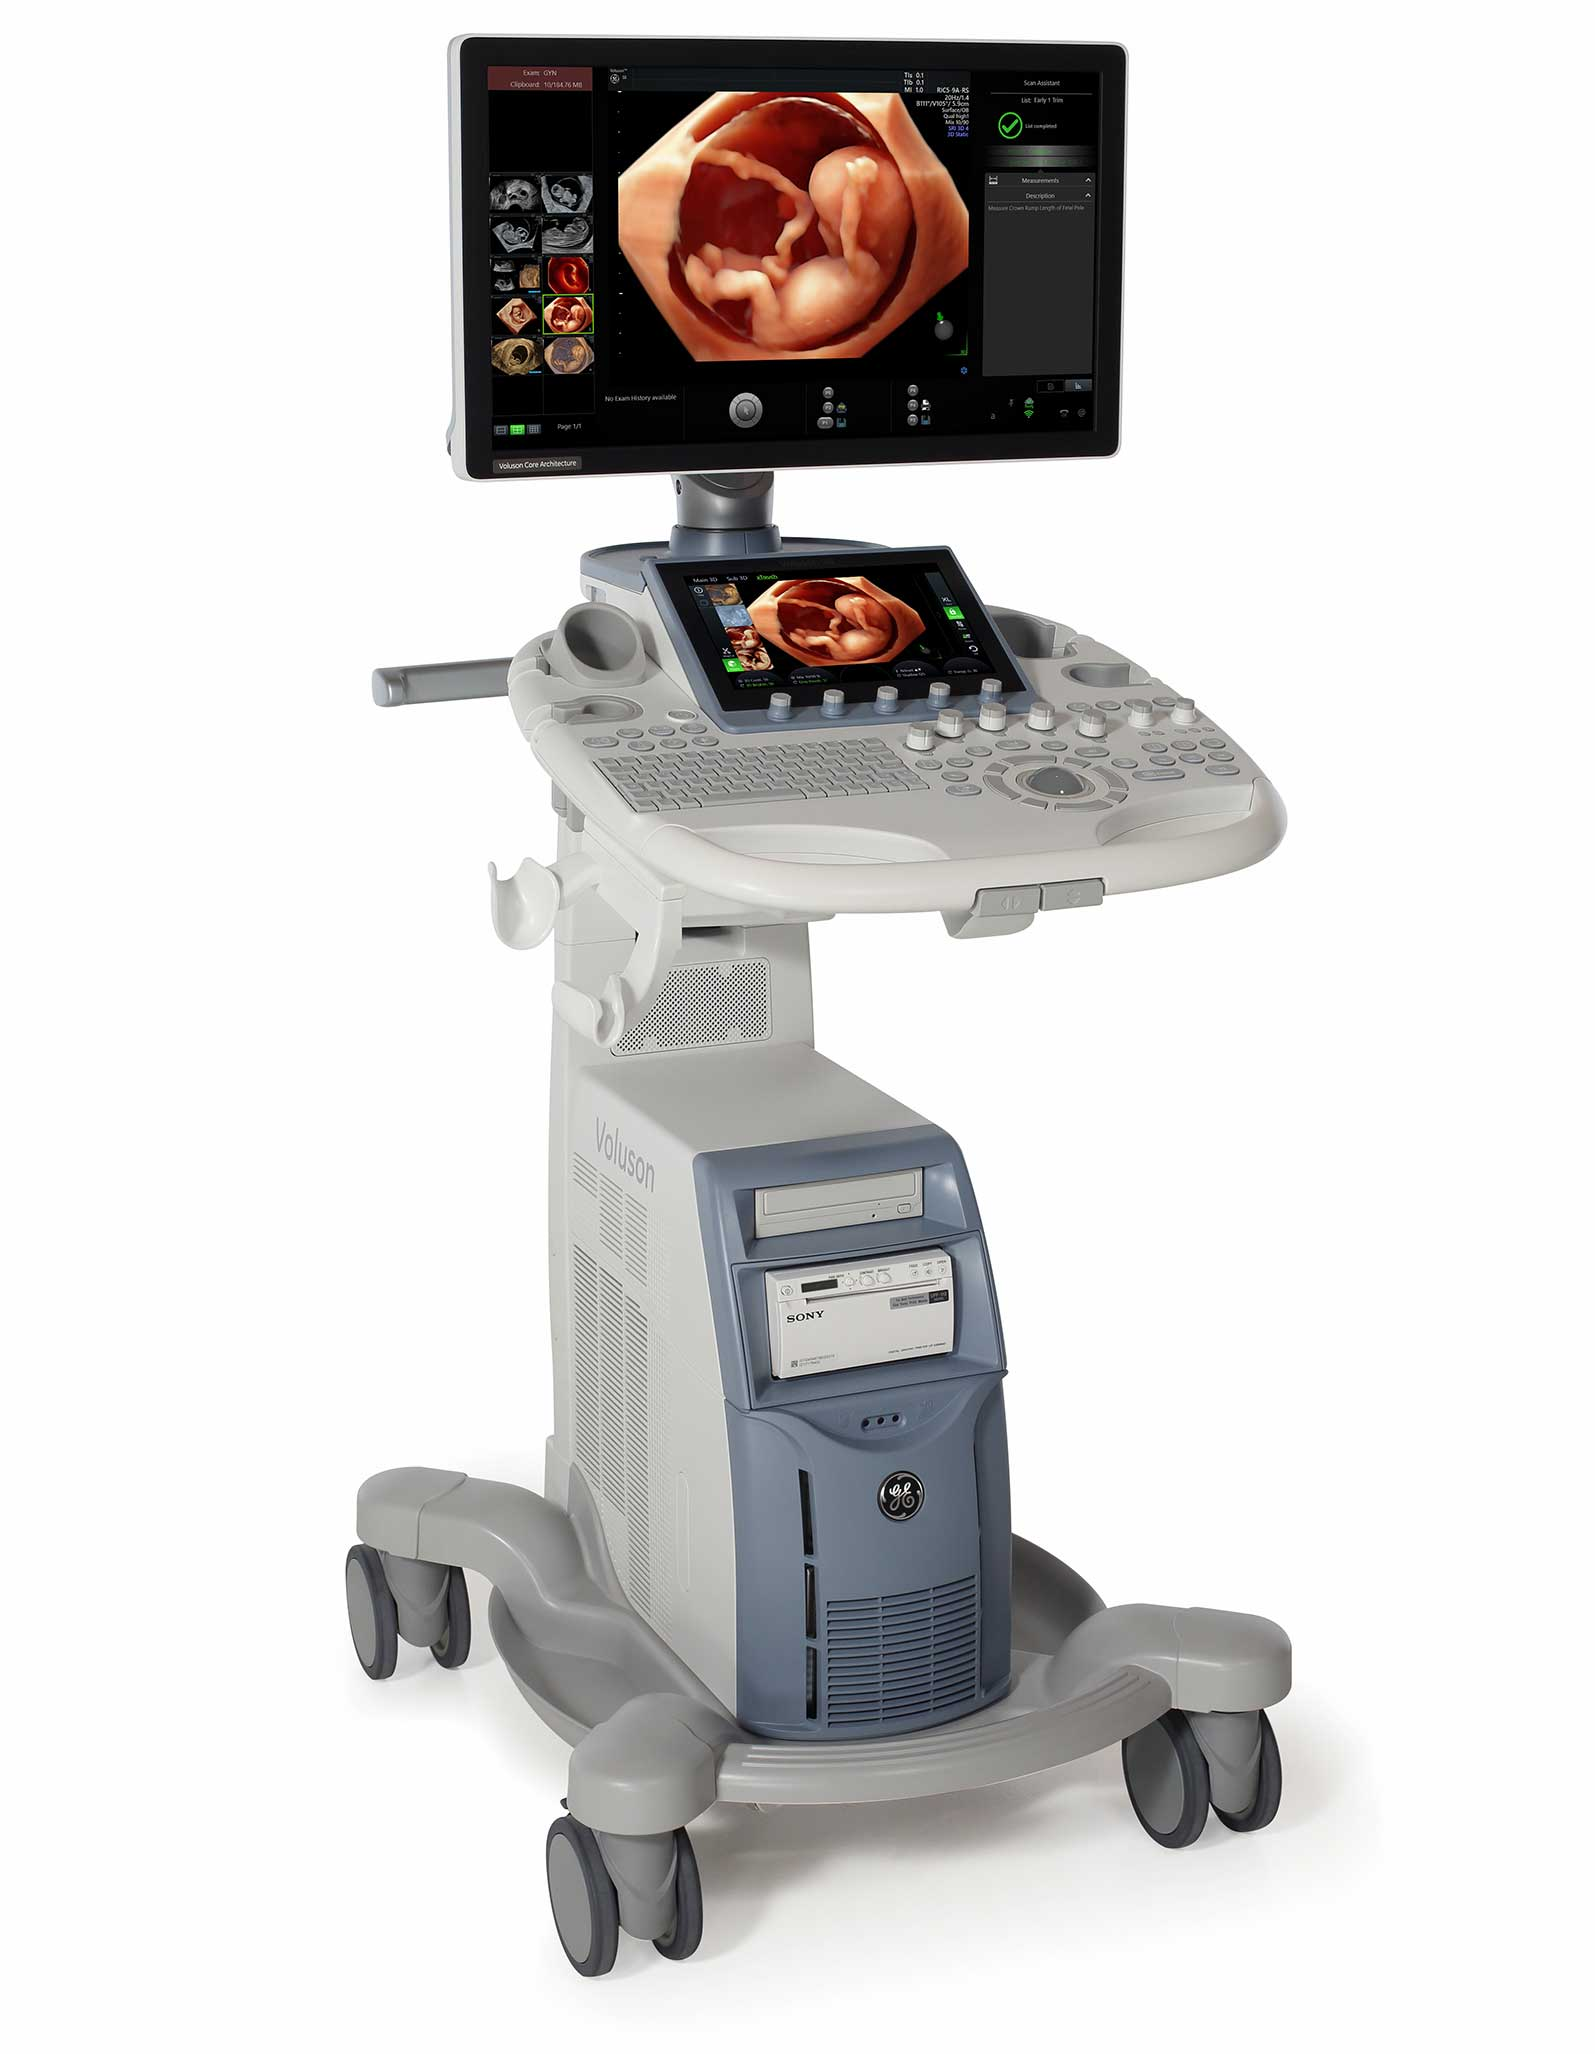 GE Voluson S8 TOUCH – For Gynecology